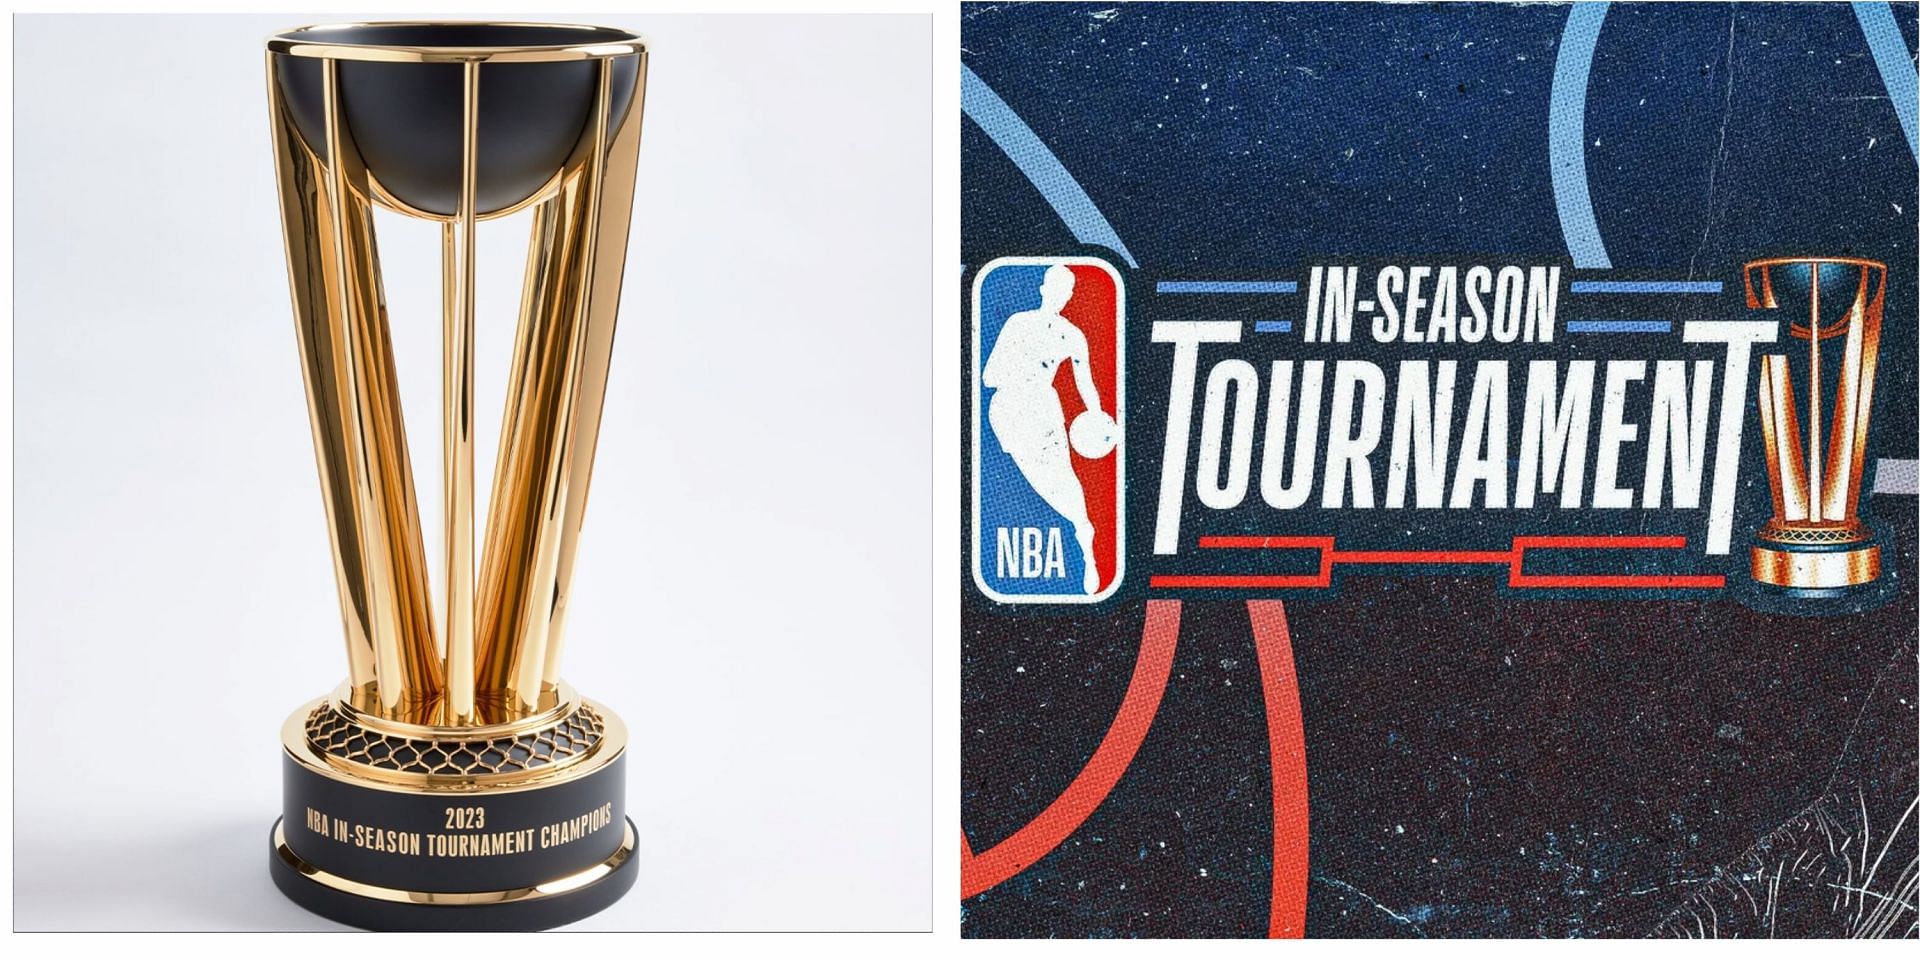  key features of new NBA Cup for In-Season Tournament